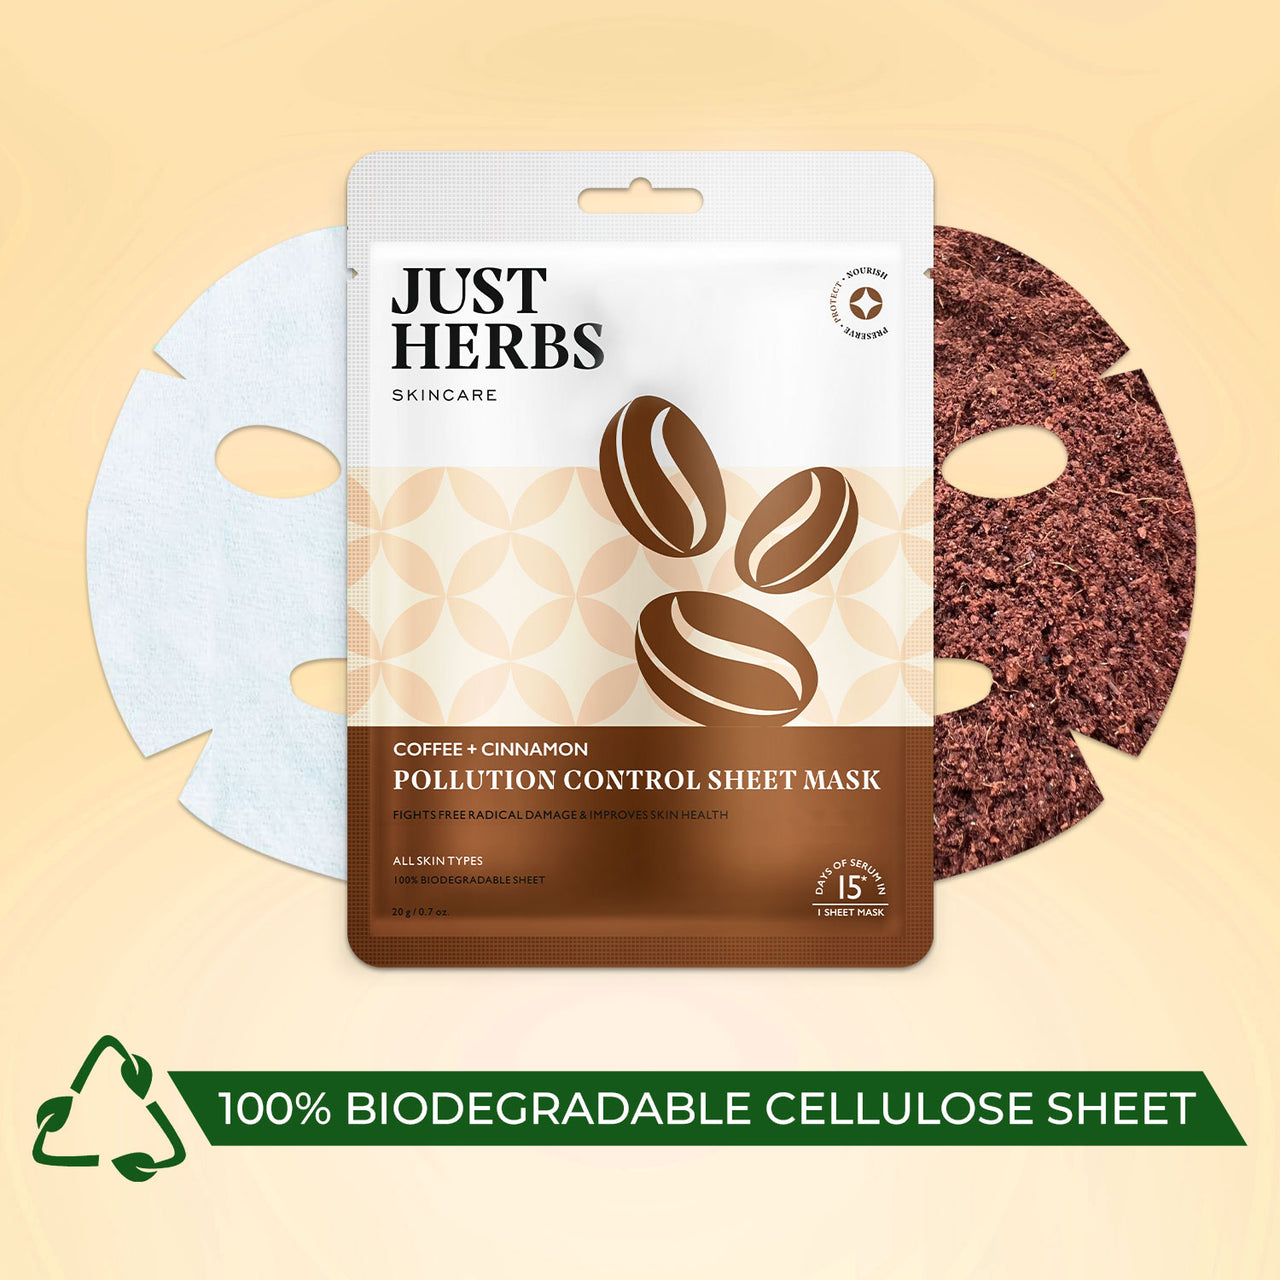 Coffee Sheet Mask with Cinnamon For Pollution Control